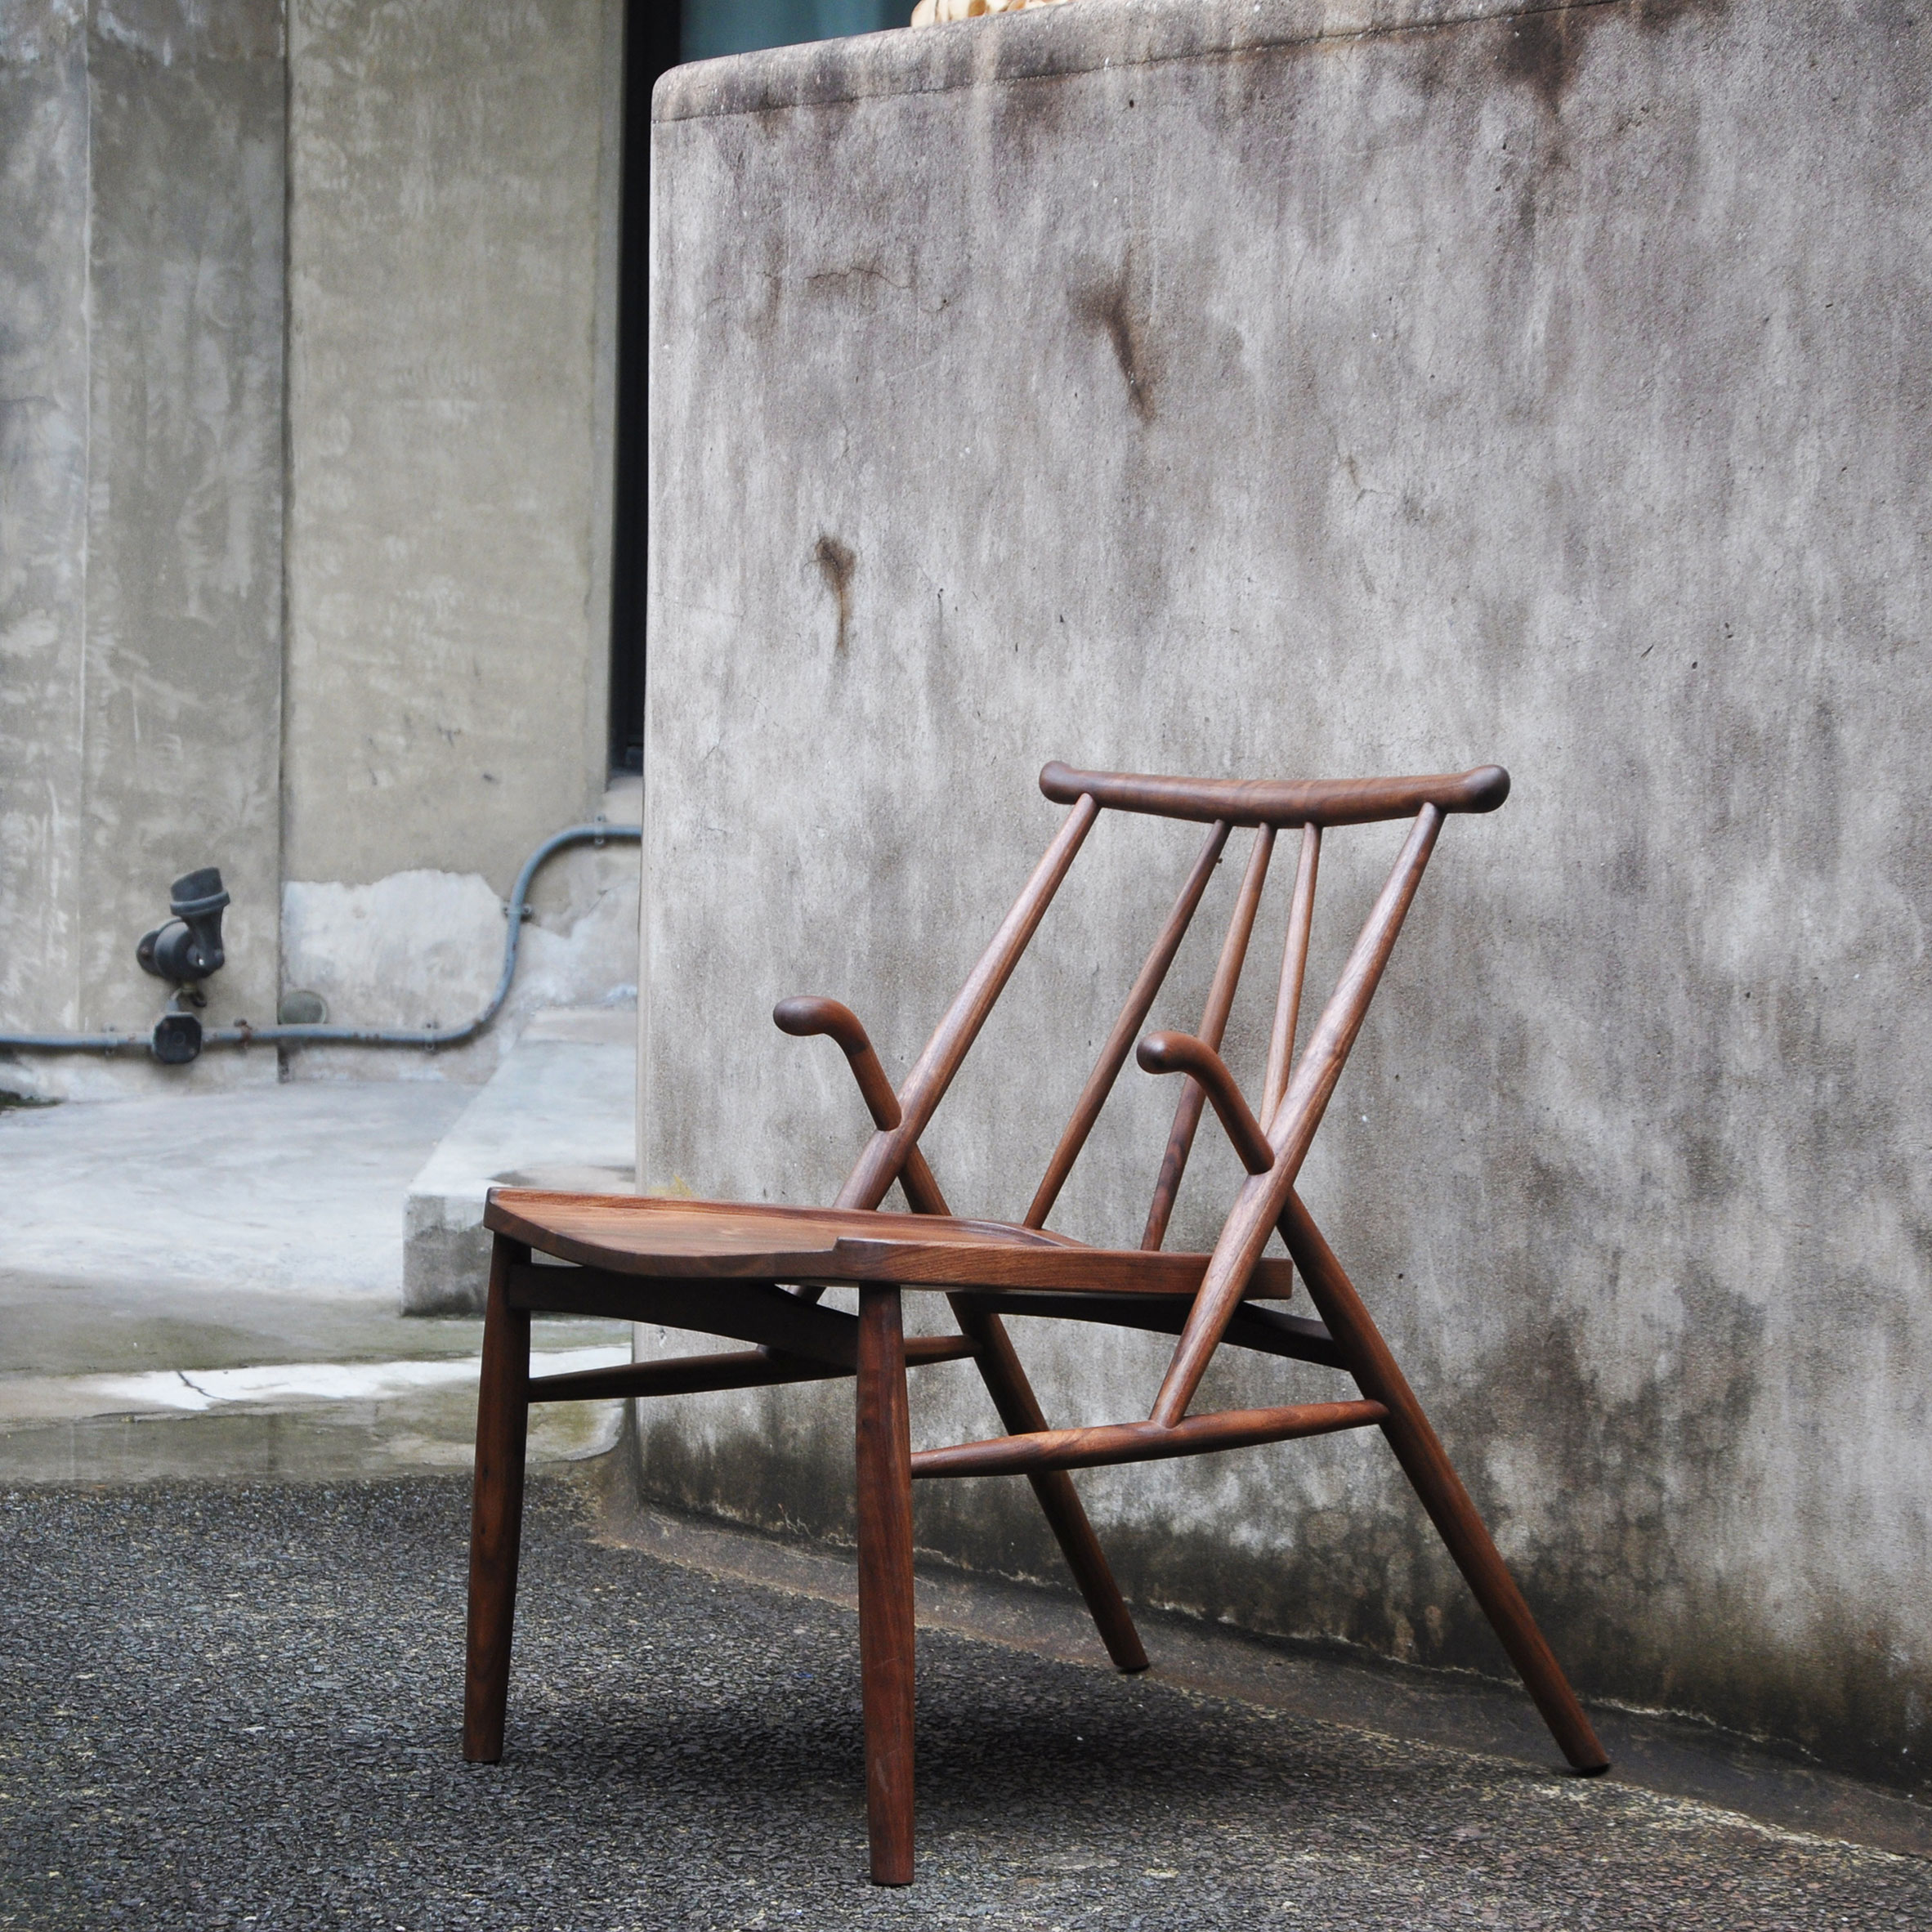 Wenlot furniture will be exhibited at Design Shanghai